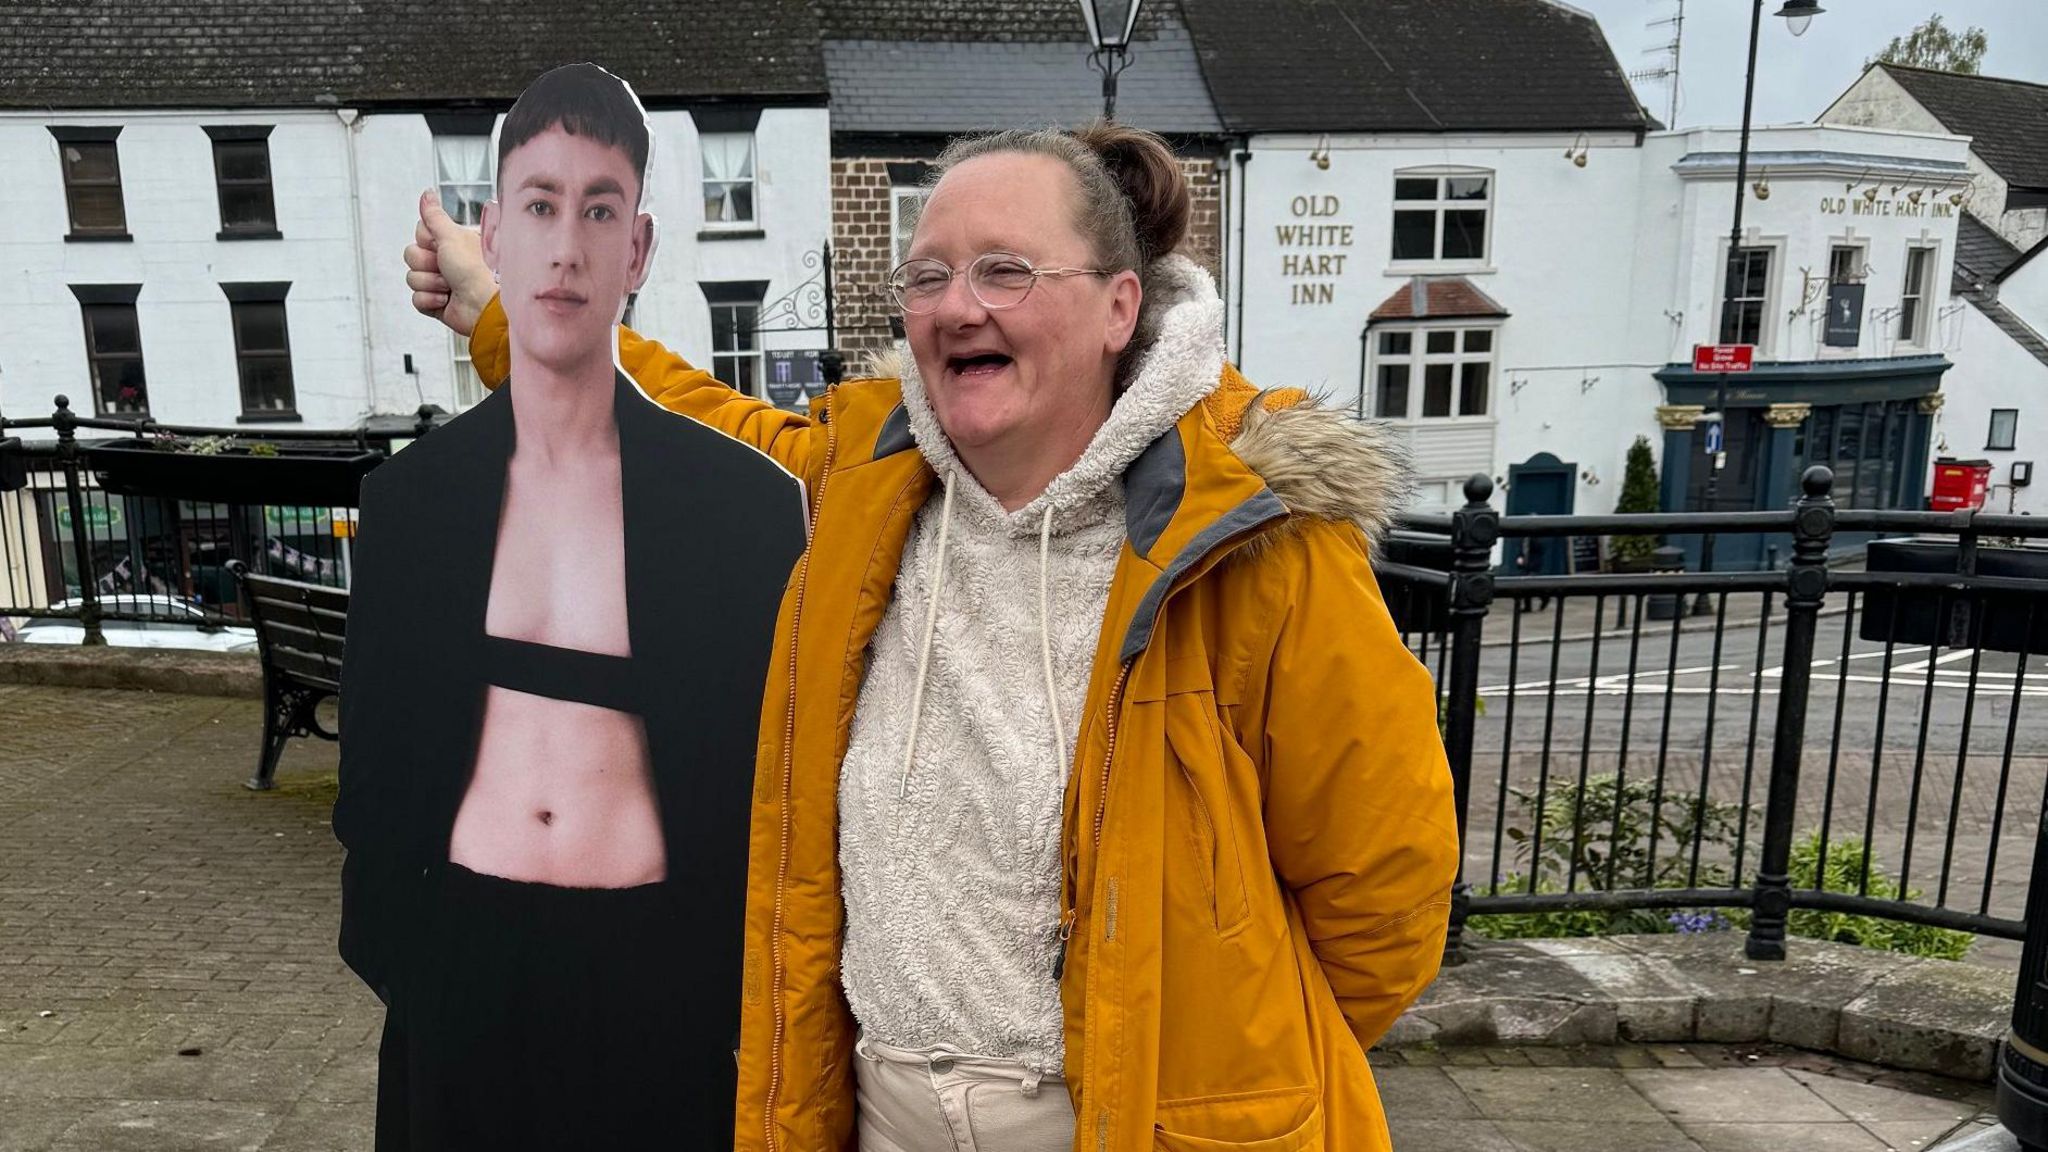 Woman in orange standing next to a cutout of Olly Alexander